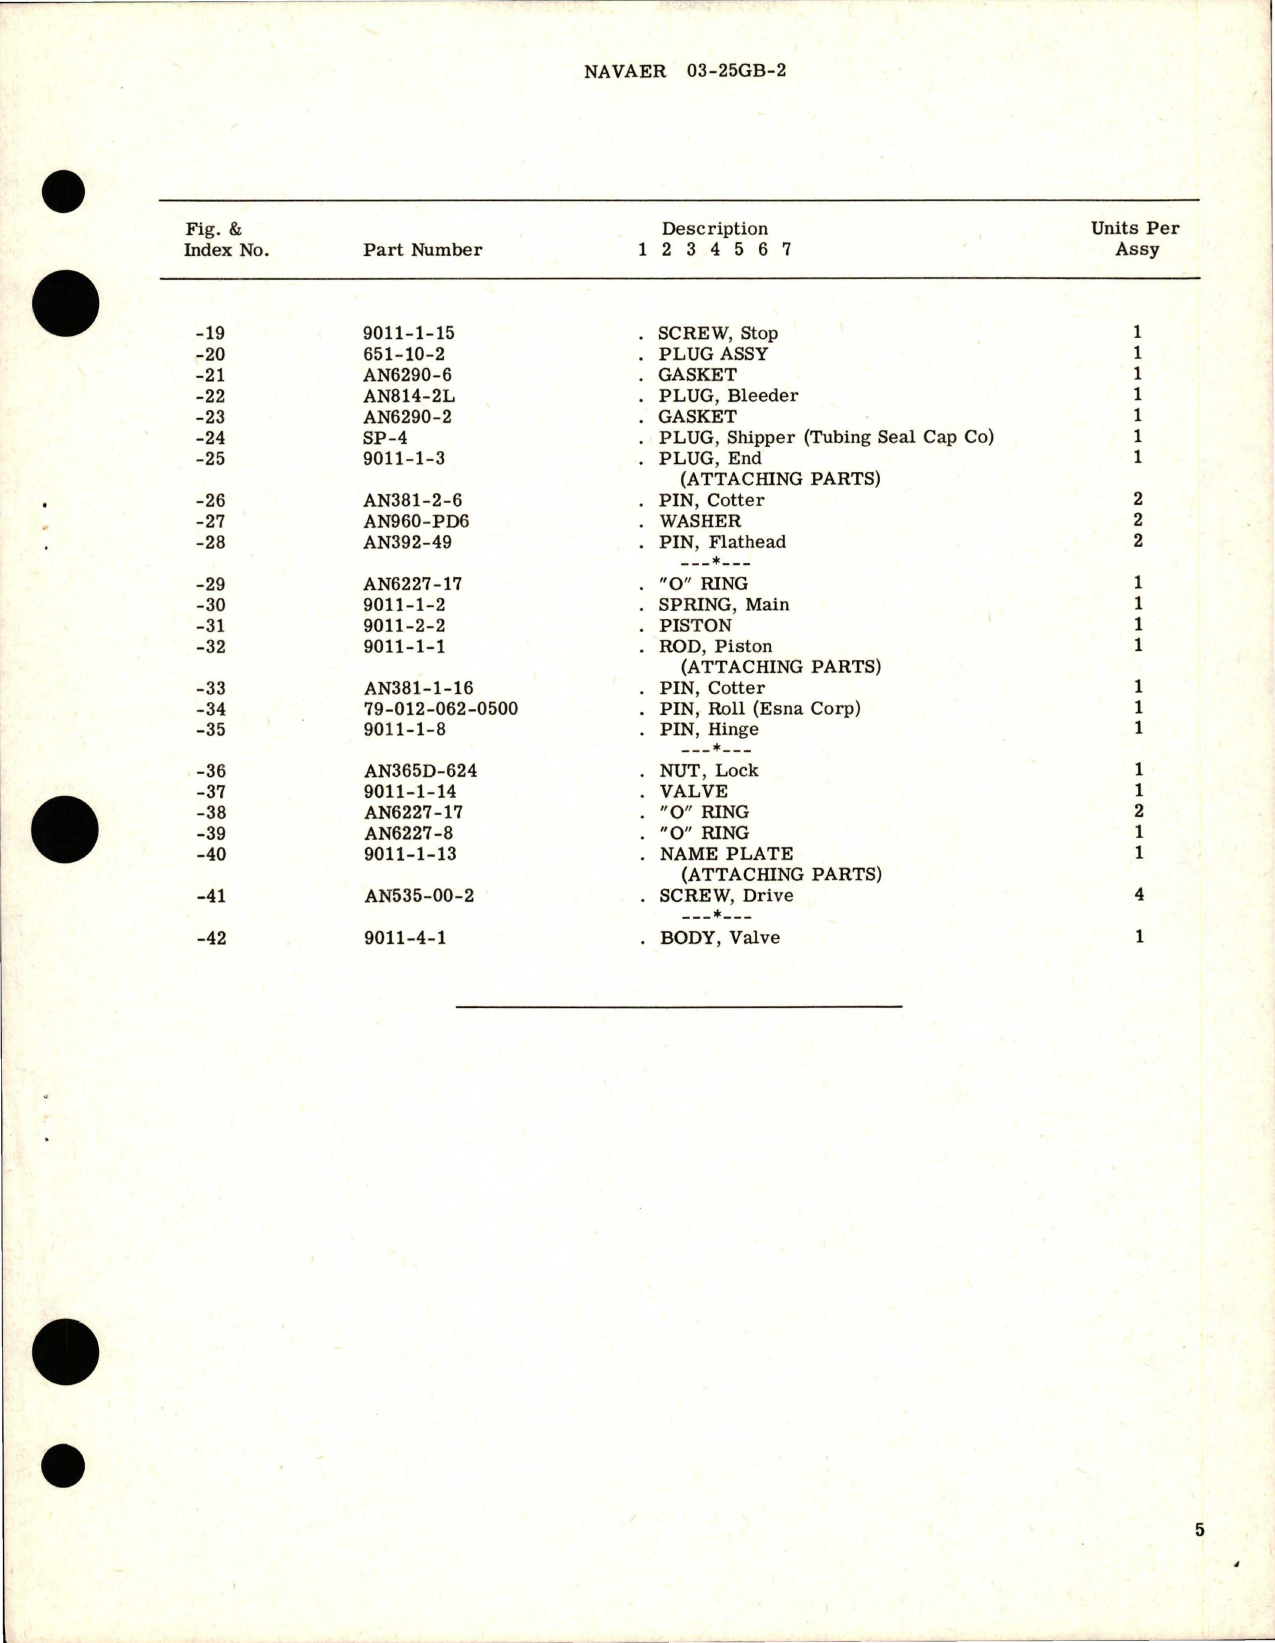 Sample page 5 from AirCorps Library document: Overhaul Instructions wIth Parts Breakdown for Rotor Master Brake Cylinder - Model 9011